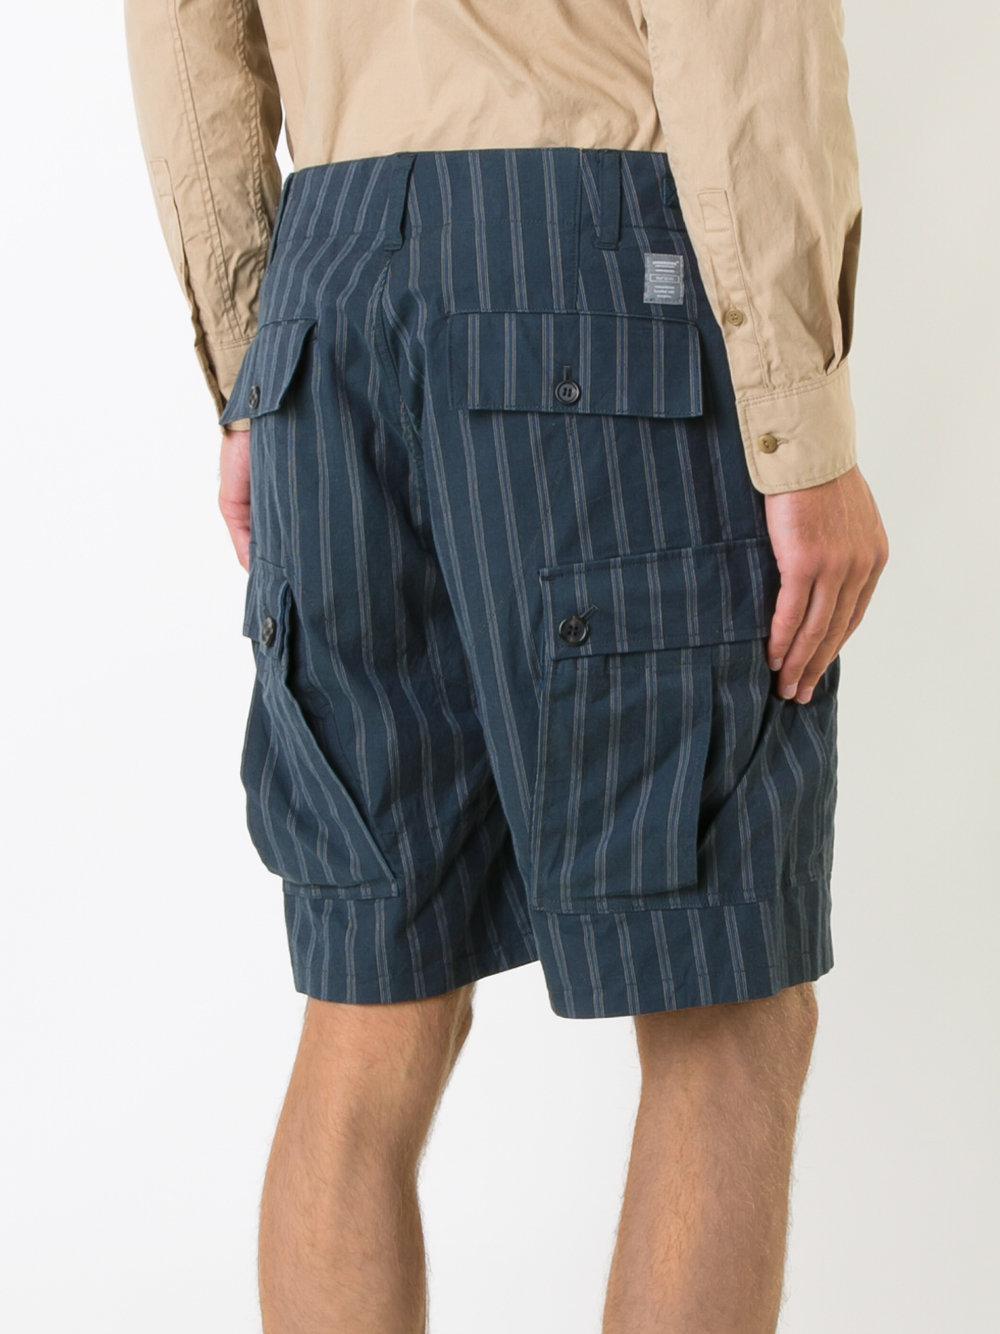 Undercover Striped Shorts in Blue for Men - Lyst